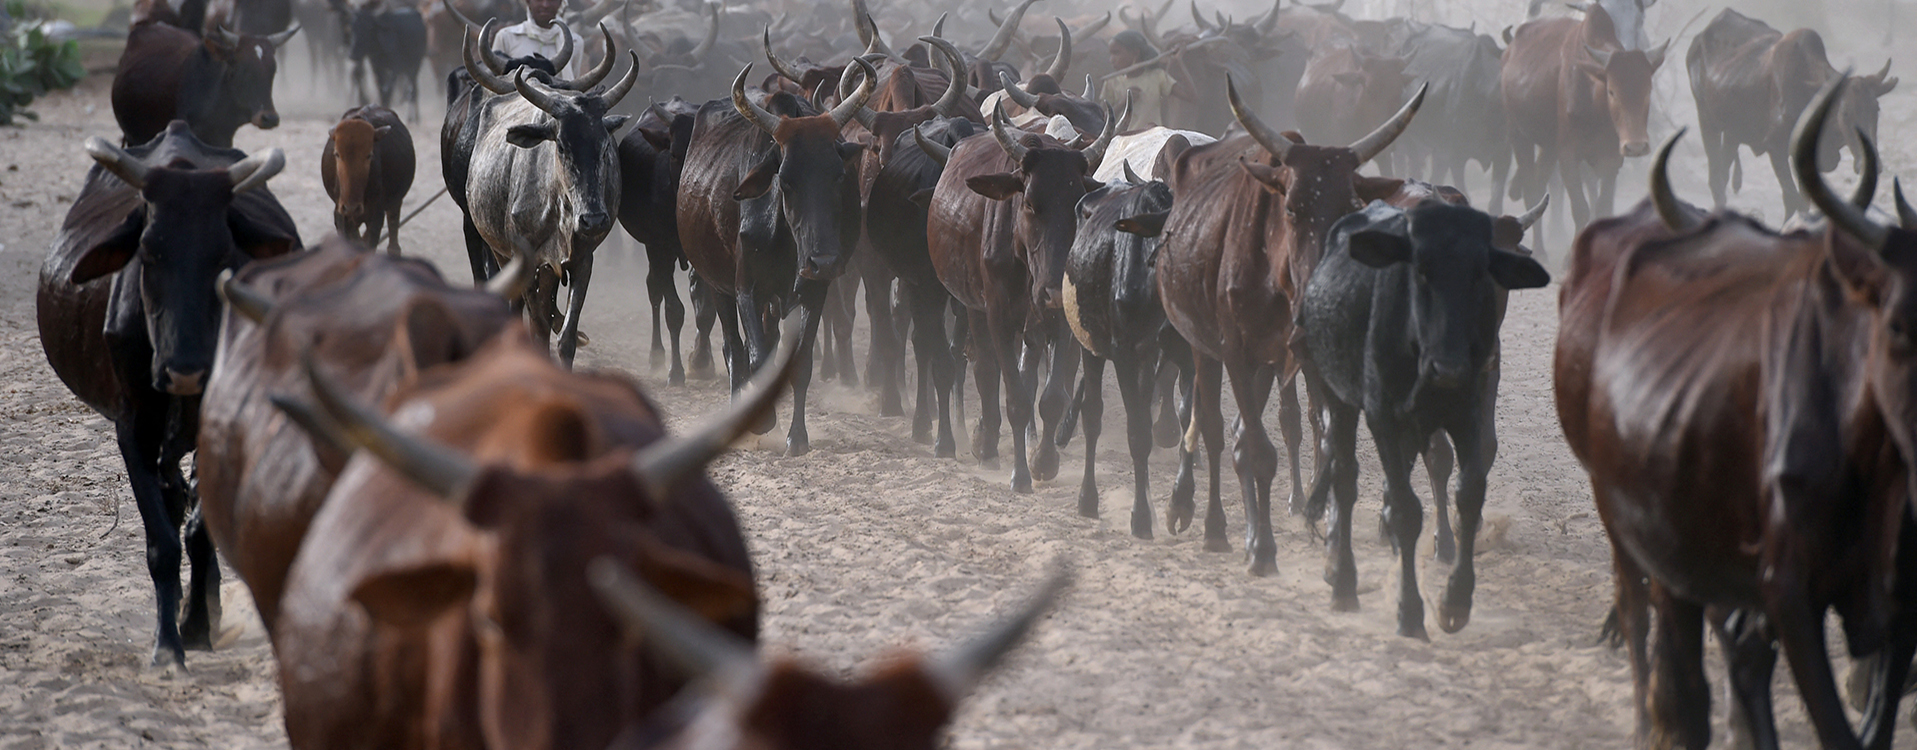 No silver bullet to stop cattle rustling in East Africa